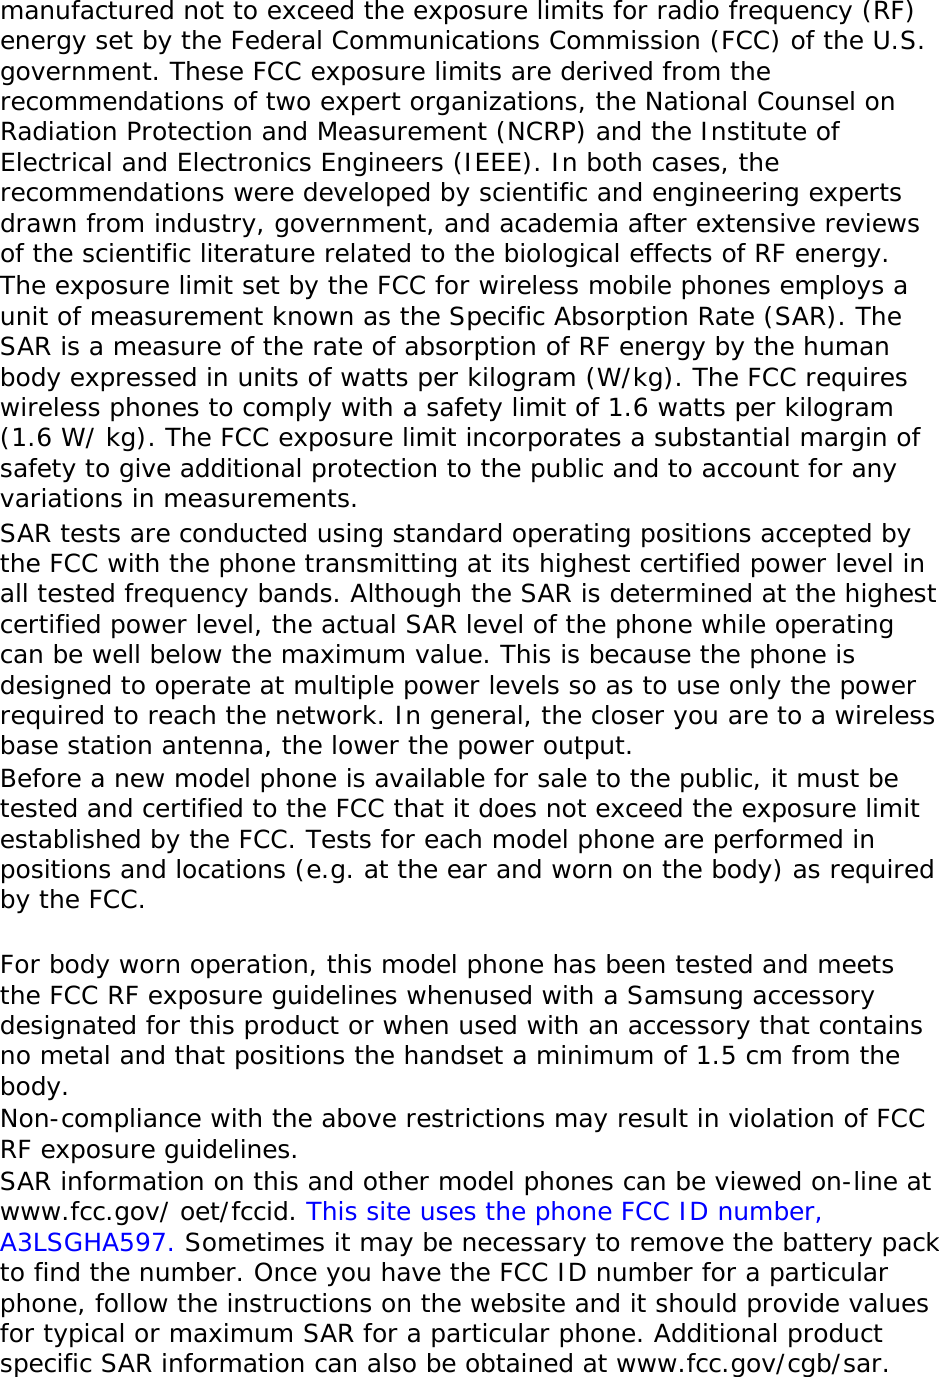 manufactured not to exceed the exposure limits for radio frequency (RF) energy set by the Federal Communications Commission (FCC) of the U.S. government. These FCC exposure limits are derived from the recommendations of two expert organizations, the National Counsel on Radiation Protection and Measurement (NCRP) and the Institute of Electrical and Electronics Engineers (IEEE). In both cases, the recommendations were developed by scientific and engineering experts drawn from industry, government, and academia after extensive reviews of the scientific literature related to the biological effects of RF energy. The exposure limit set by the FCC for wireless mobile phones employs a unit of measurement known as the Specific Absorption Rate (SAR). The SAR is a measure of the rate of absorption of RF energy by the human body expressed in units of watts per kilogram (W/kg). The FCC requires wireless phones to comply with a safety limit of 1.6 watts per kilogram (1.6 W/ kg). The FCC exposure limit incorporates a substantial margin of safety to give additional protection to the public and to account for any variations in measurements. SAR tests are conducted using standard operating positions accepted by the FCC with the phone transmitting at its highest certified power level in all tested frequency bands. Although the SAR is determined at the highest certified power level, the actual SAR level of the phone while operating can be well below the maximum value. This is because the phone is designed to operate at multiple power levels so as to use only the power required to reach the network. In general, the closer you are to a wireless base station antenna, the lower the power output. Before a new model phone is available for sale to the public, it must be tested and certified to the FCC that it does not exceed the exposure limit established by the FCC. Tests for each model phone are performed in positions and locations (e.g. at the ear and worn on the body) as required by the FCC.    For body worn operation, this model phone has been tested and meets the FCC RF exposure guidelines whenused with a Samsung accessory designated for this product or when used with an accessory that contains no metal and that positions the handset a minimum of 1.5 cm from the body.  Non-compliance with the above restrictions may result in violation of FCC RF exposure guidelines. SAR information on this and other model phones can be viewed on-line at www.fcc.gov/ oet/fccid. This site uses the phone FCC ID number, A3LSGHA597. Sometimes it may be necessary to remove the battery pack to find the number. Once you have the FCC ID number for a particular phone, follow the instructions on the website and it should provide values for typical or maximum SAR for a particular phone. Additional product specific SAR information can also be obtained at www.fcc.gov/cgb/sar. 